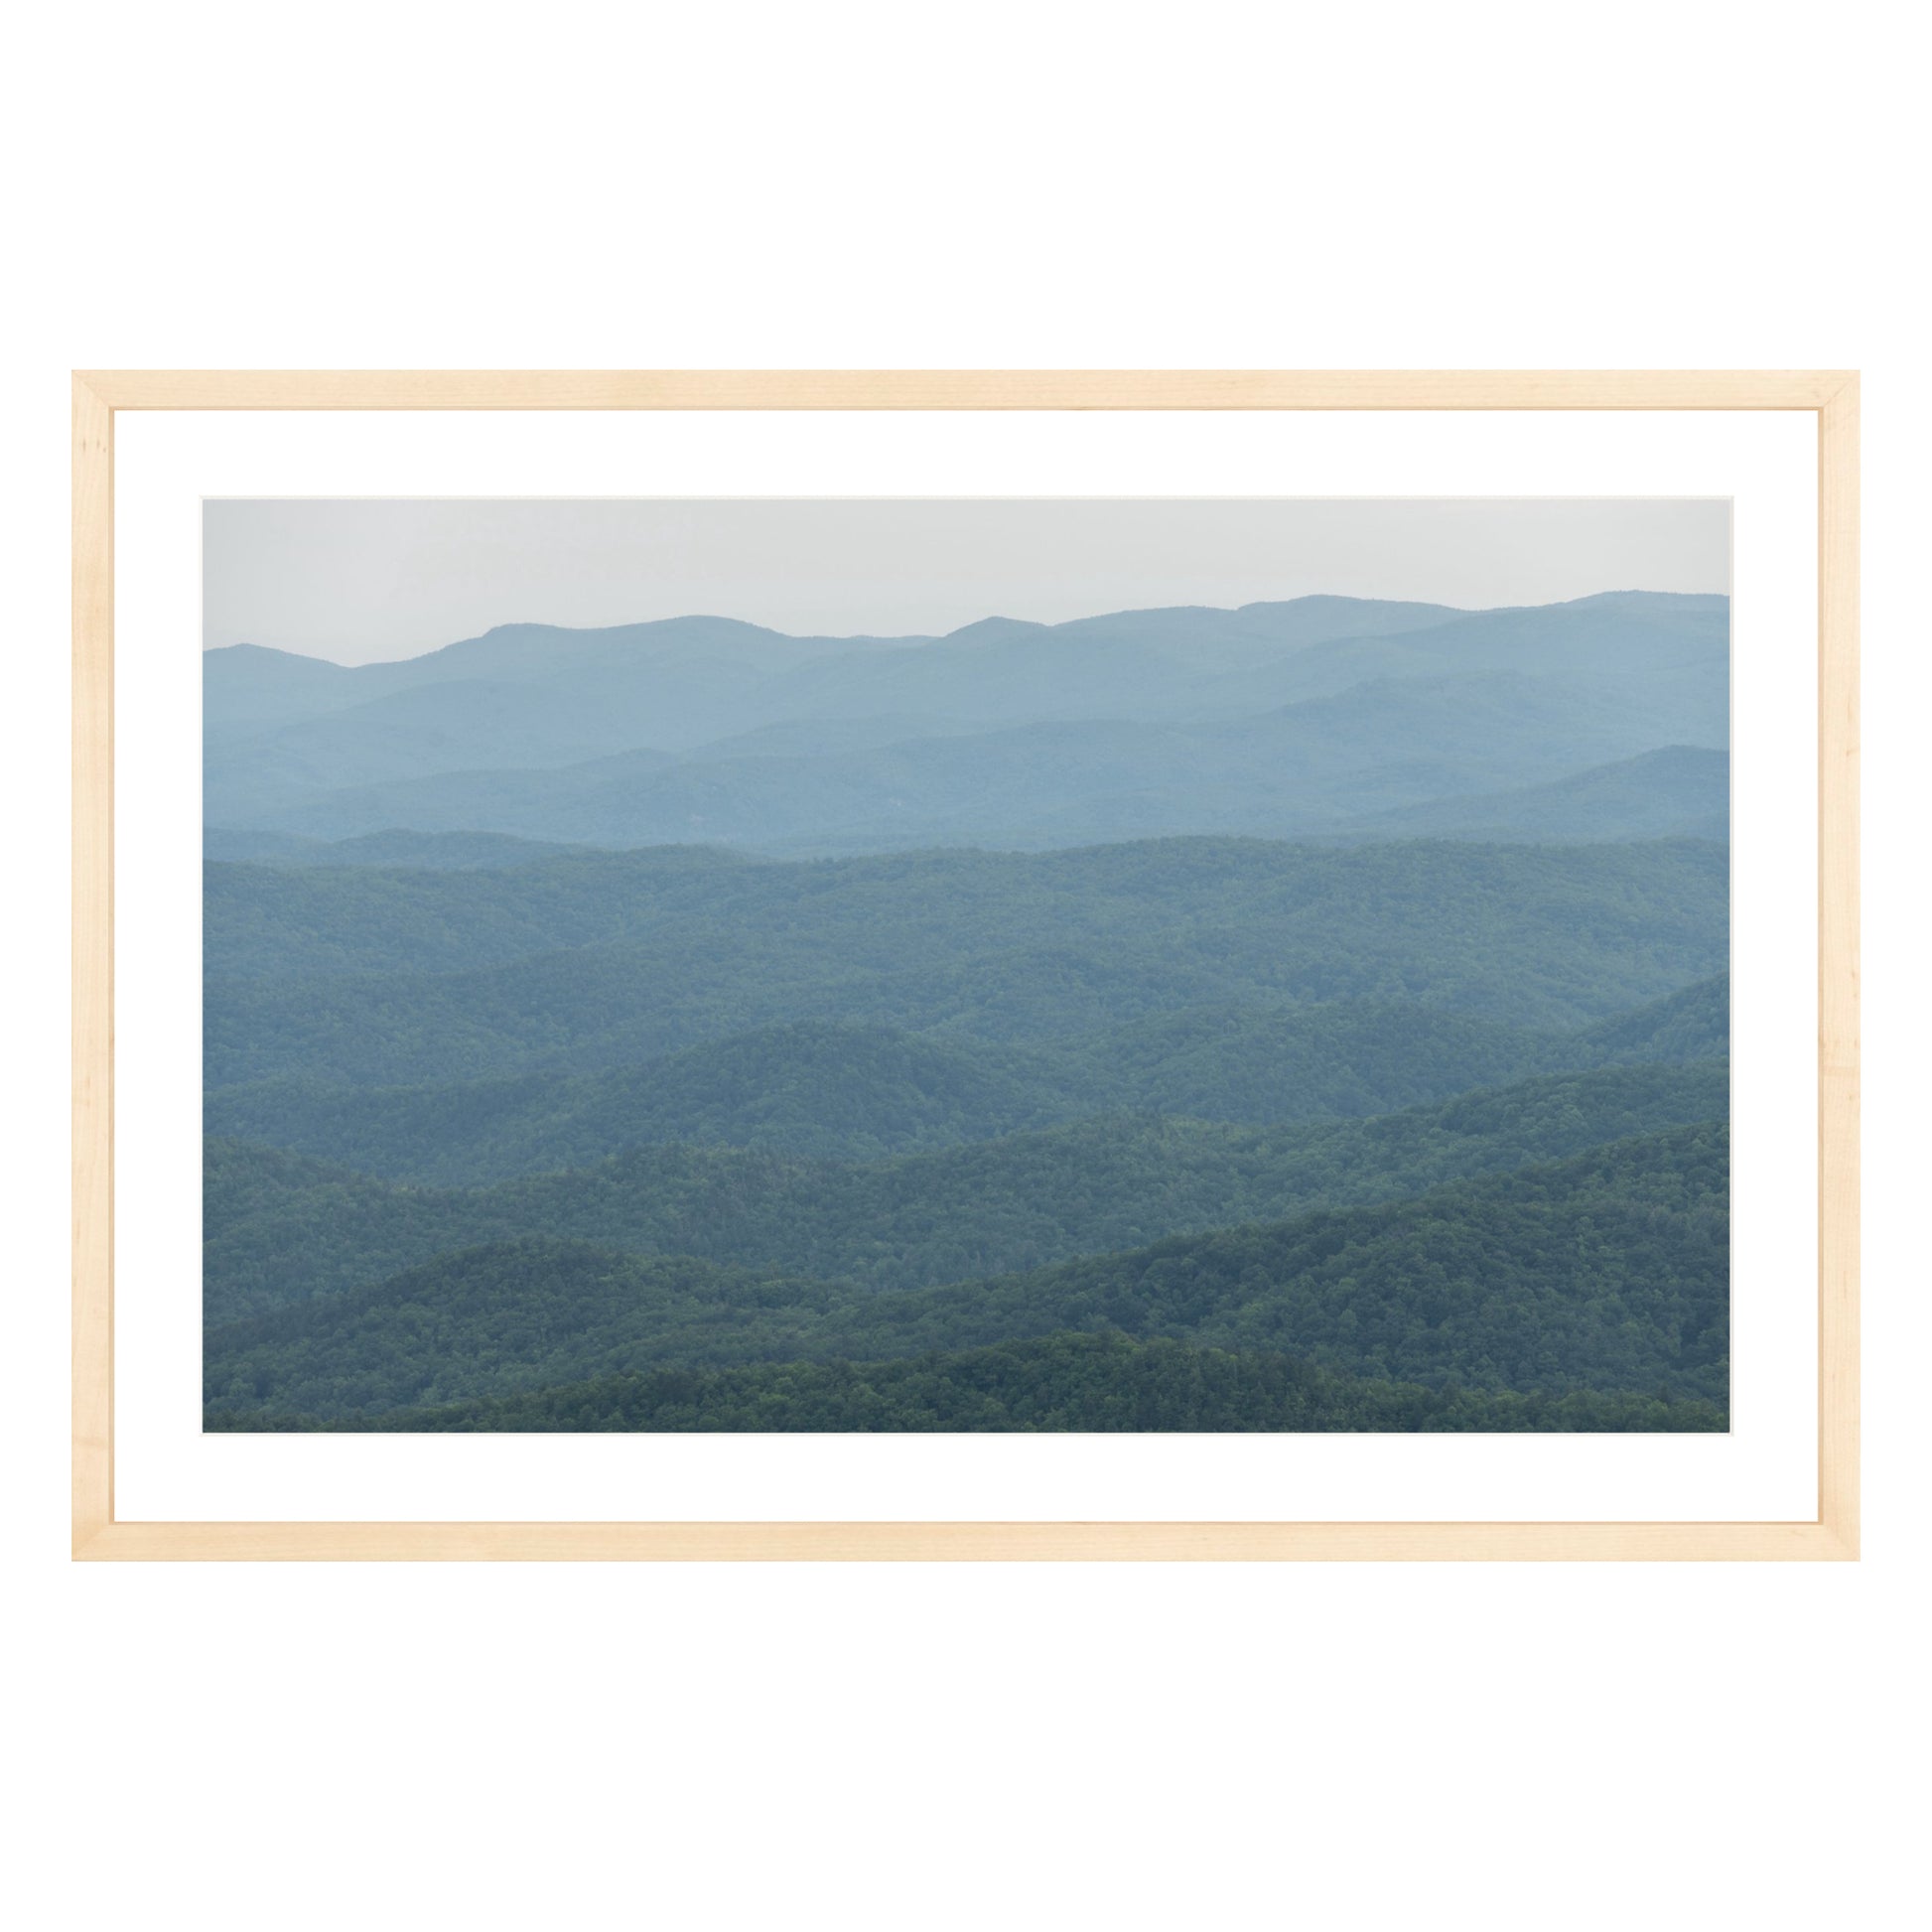 Photograph of mountains in North Carolina framed in natural wood with white mat